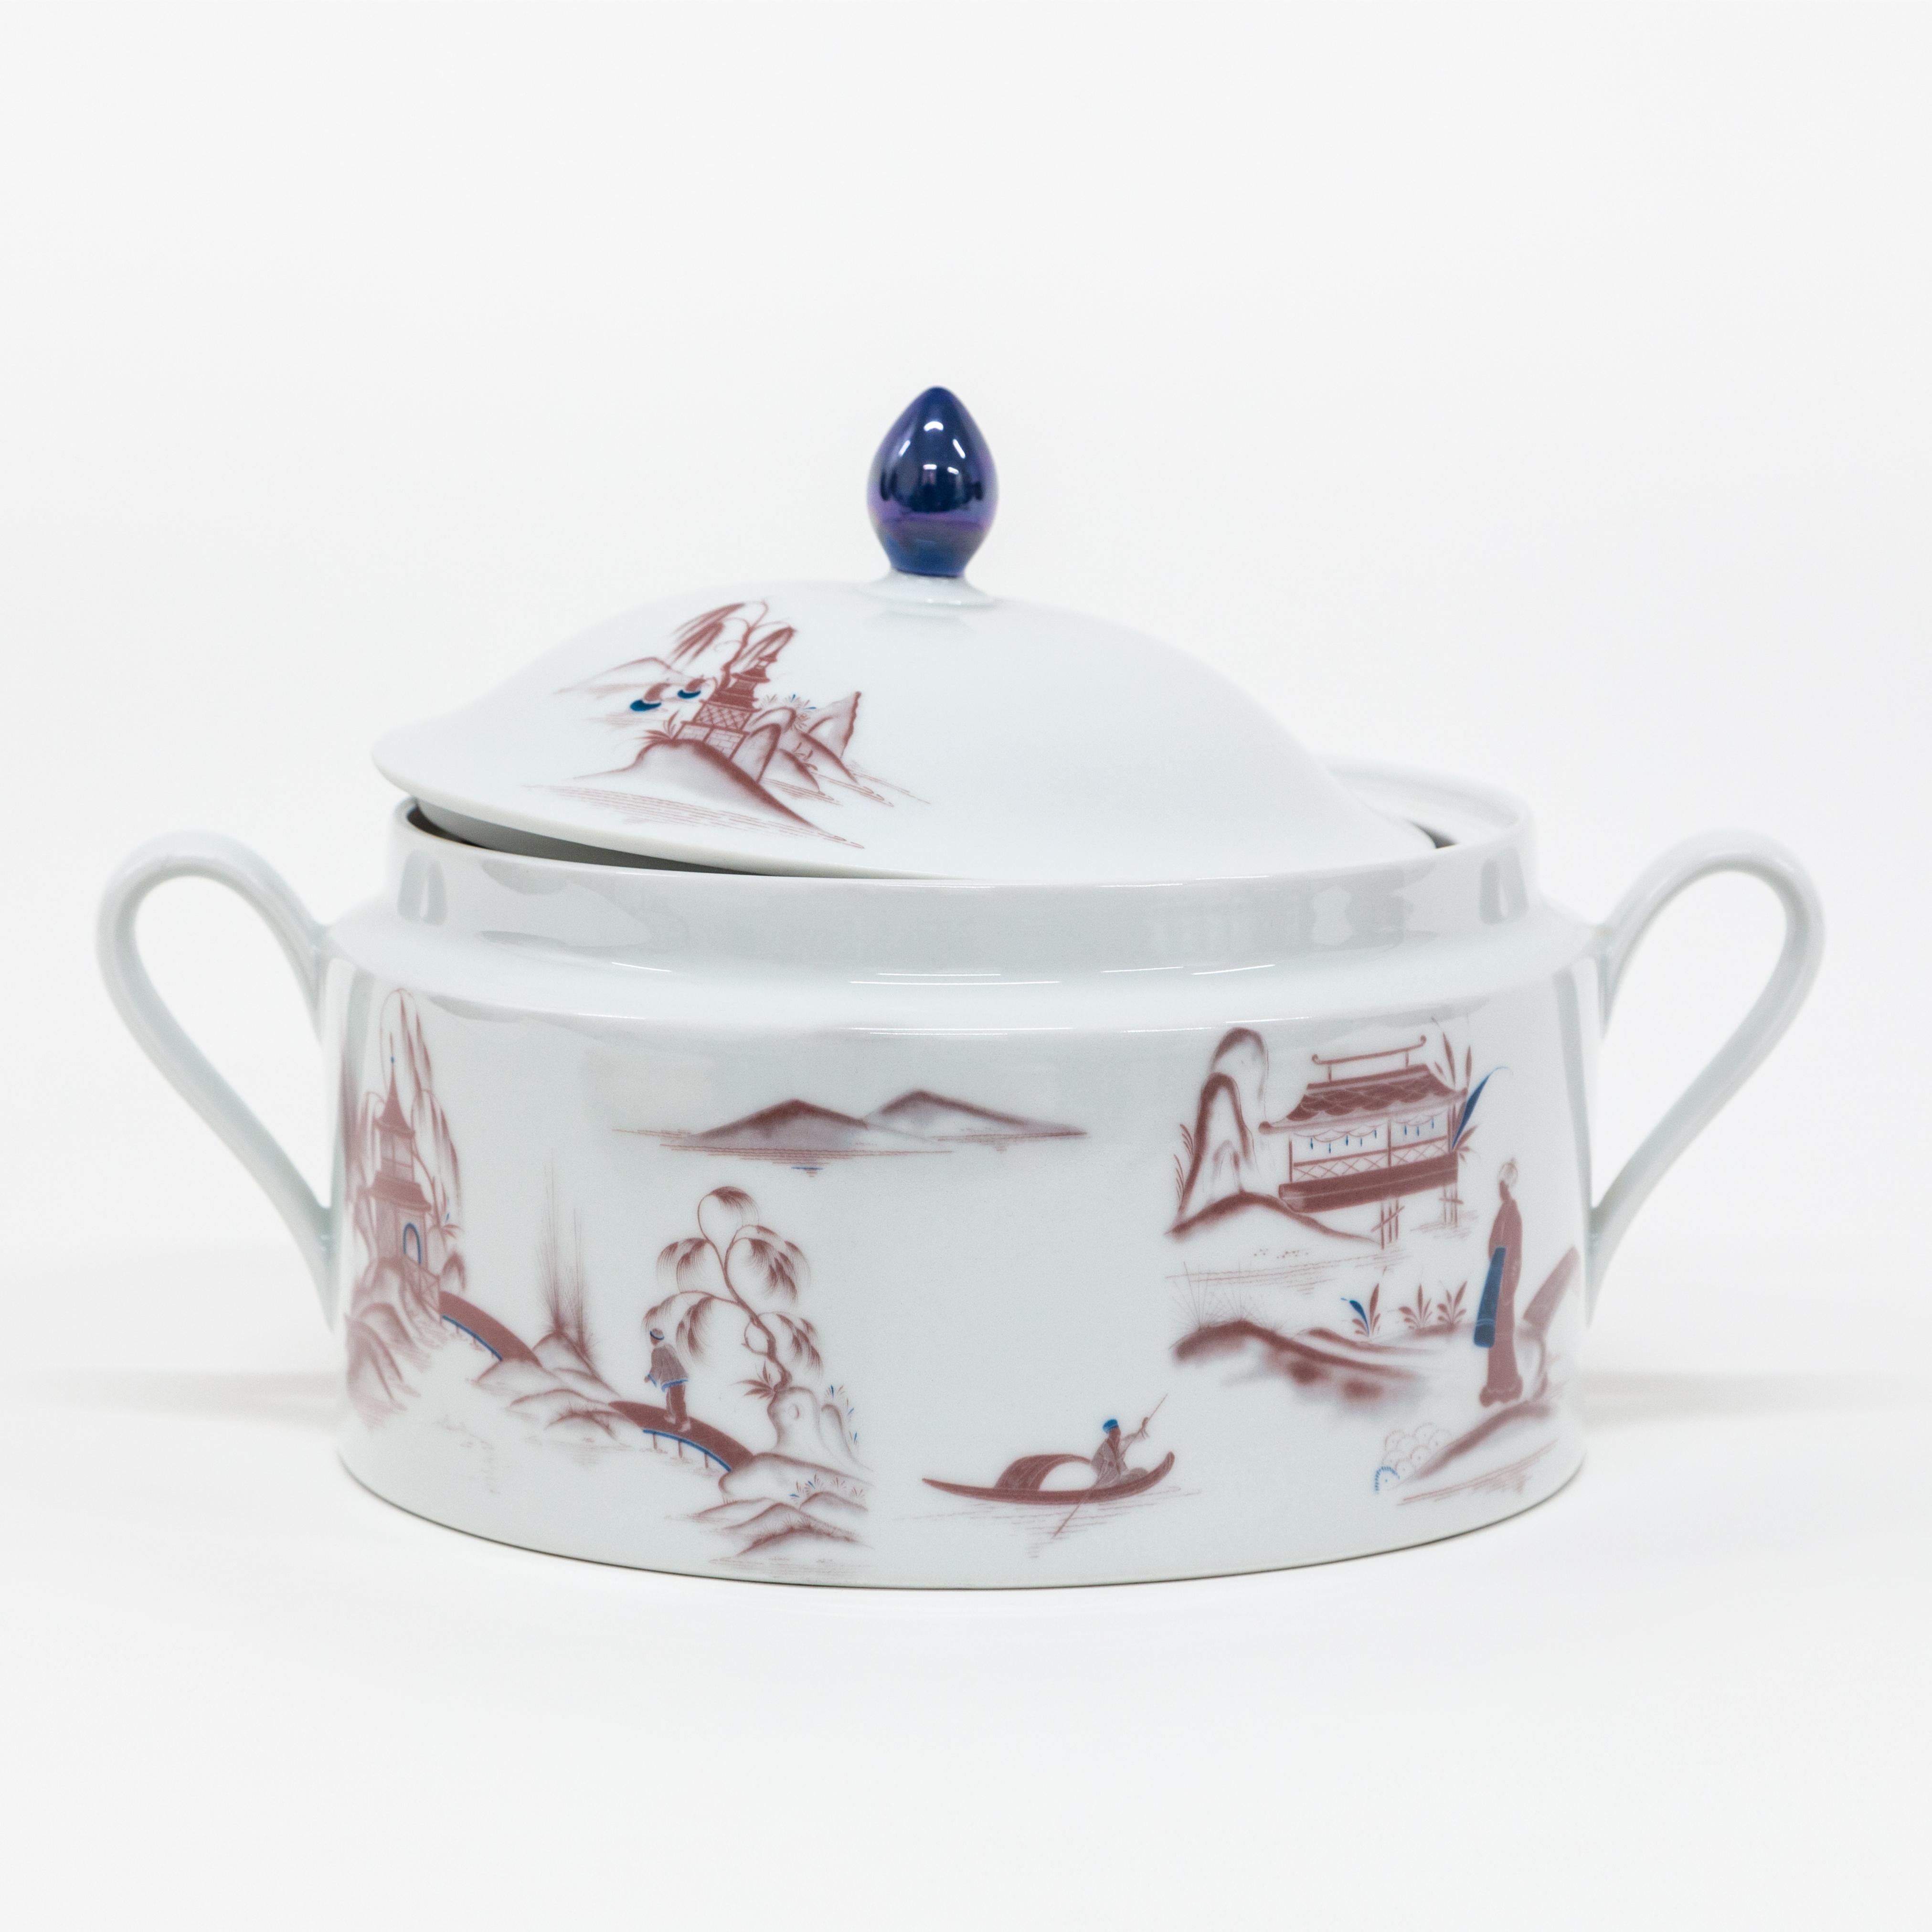 This soup tureen is part of the Grand Tour by Vito Nesta collection Natsumi, inspired by the artist's travels around the world. The Japanese lake landscape shows us figures going about their daily lives, Geisha conversing, men in small rowing boats